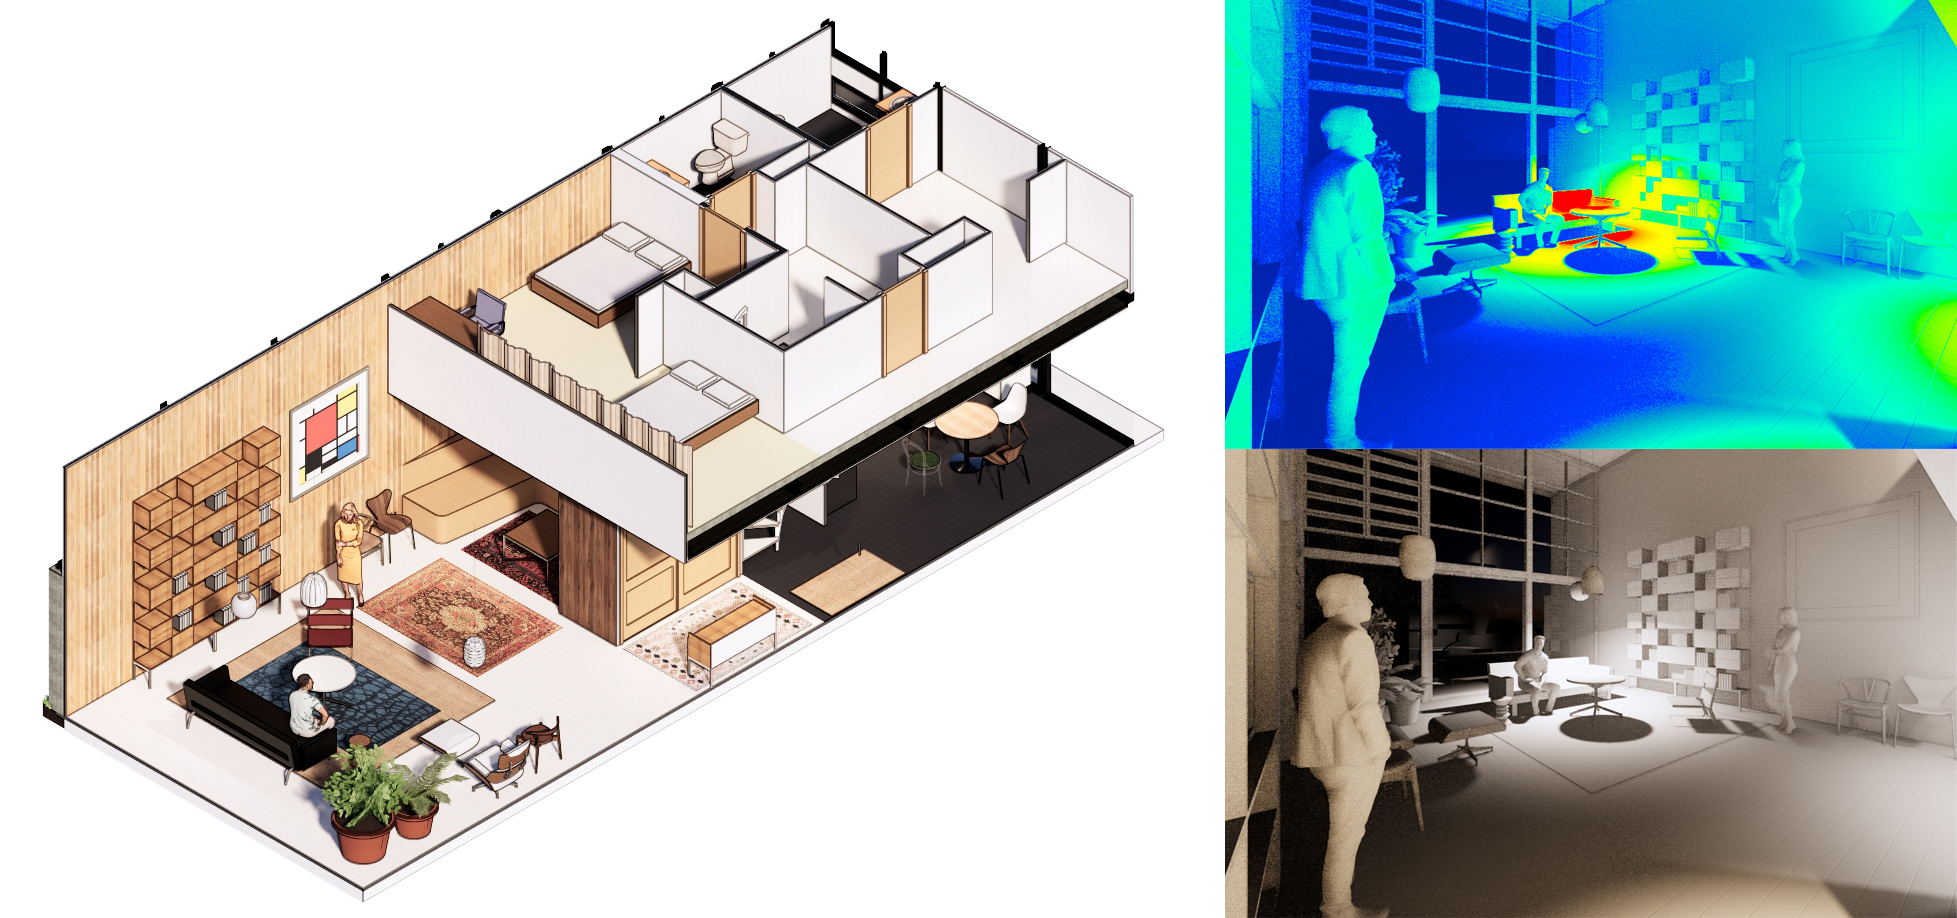 This image shows the session highlight presenting the rendered isometric view, a white model, and a light analysis render. This is the expected result at the end of this lecture.